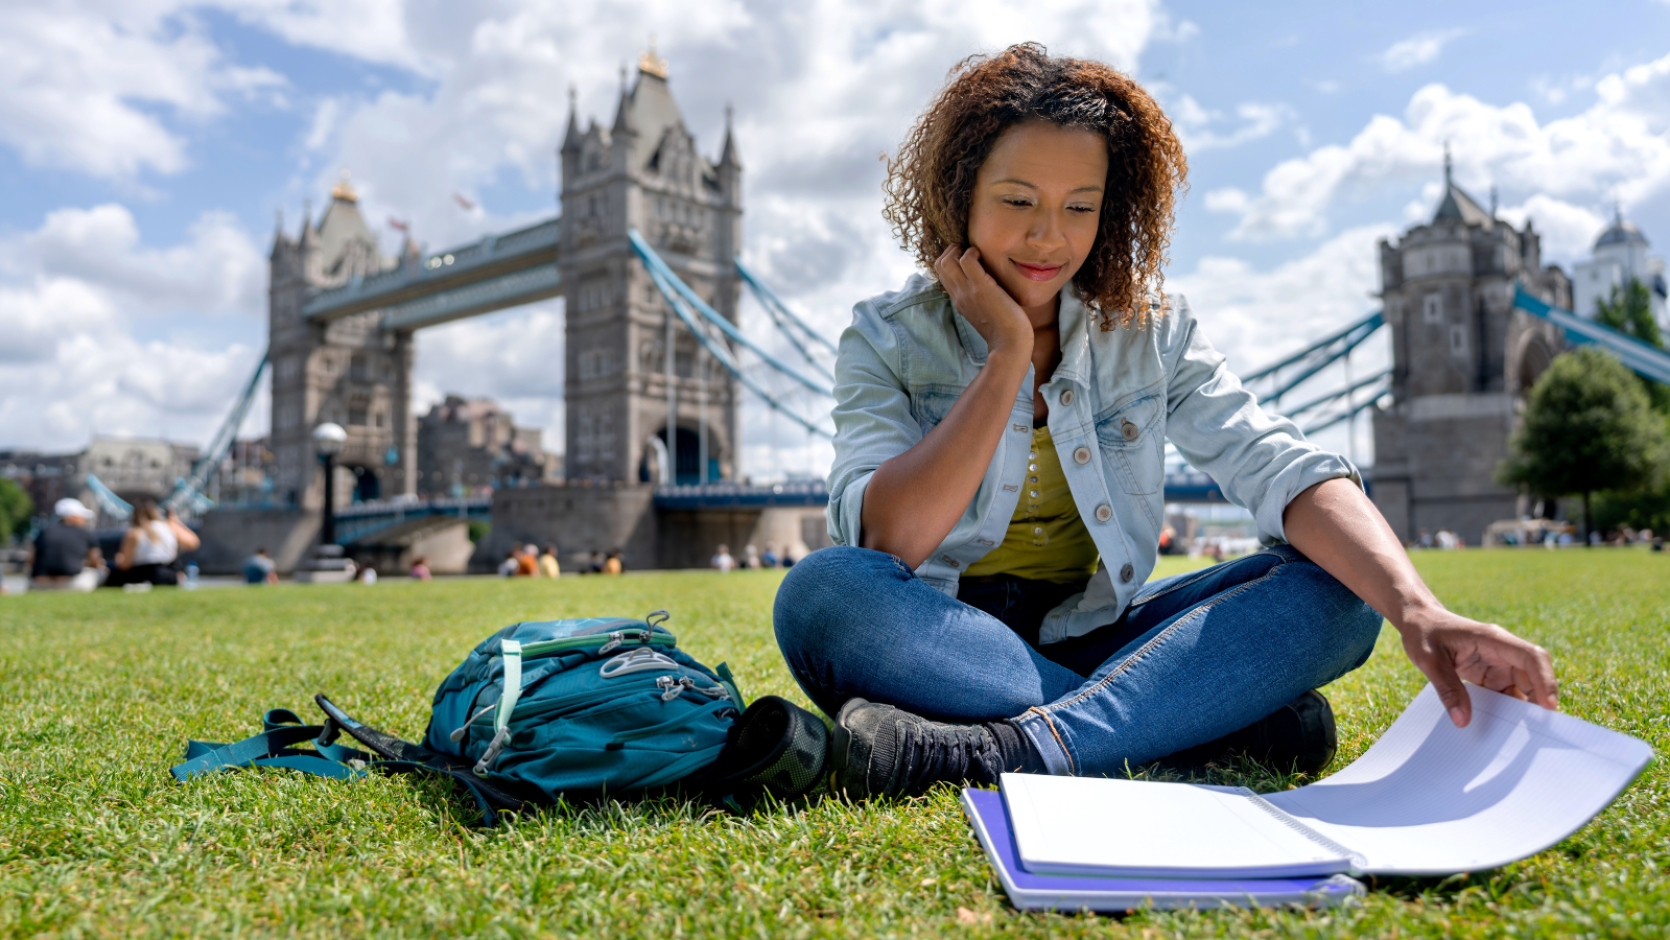 A young person sitting on grass with study books in front of them and a bag next to them. Behind them you can see Tower Bridge in London as well as blue sky and white fluffy clouds.